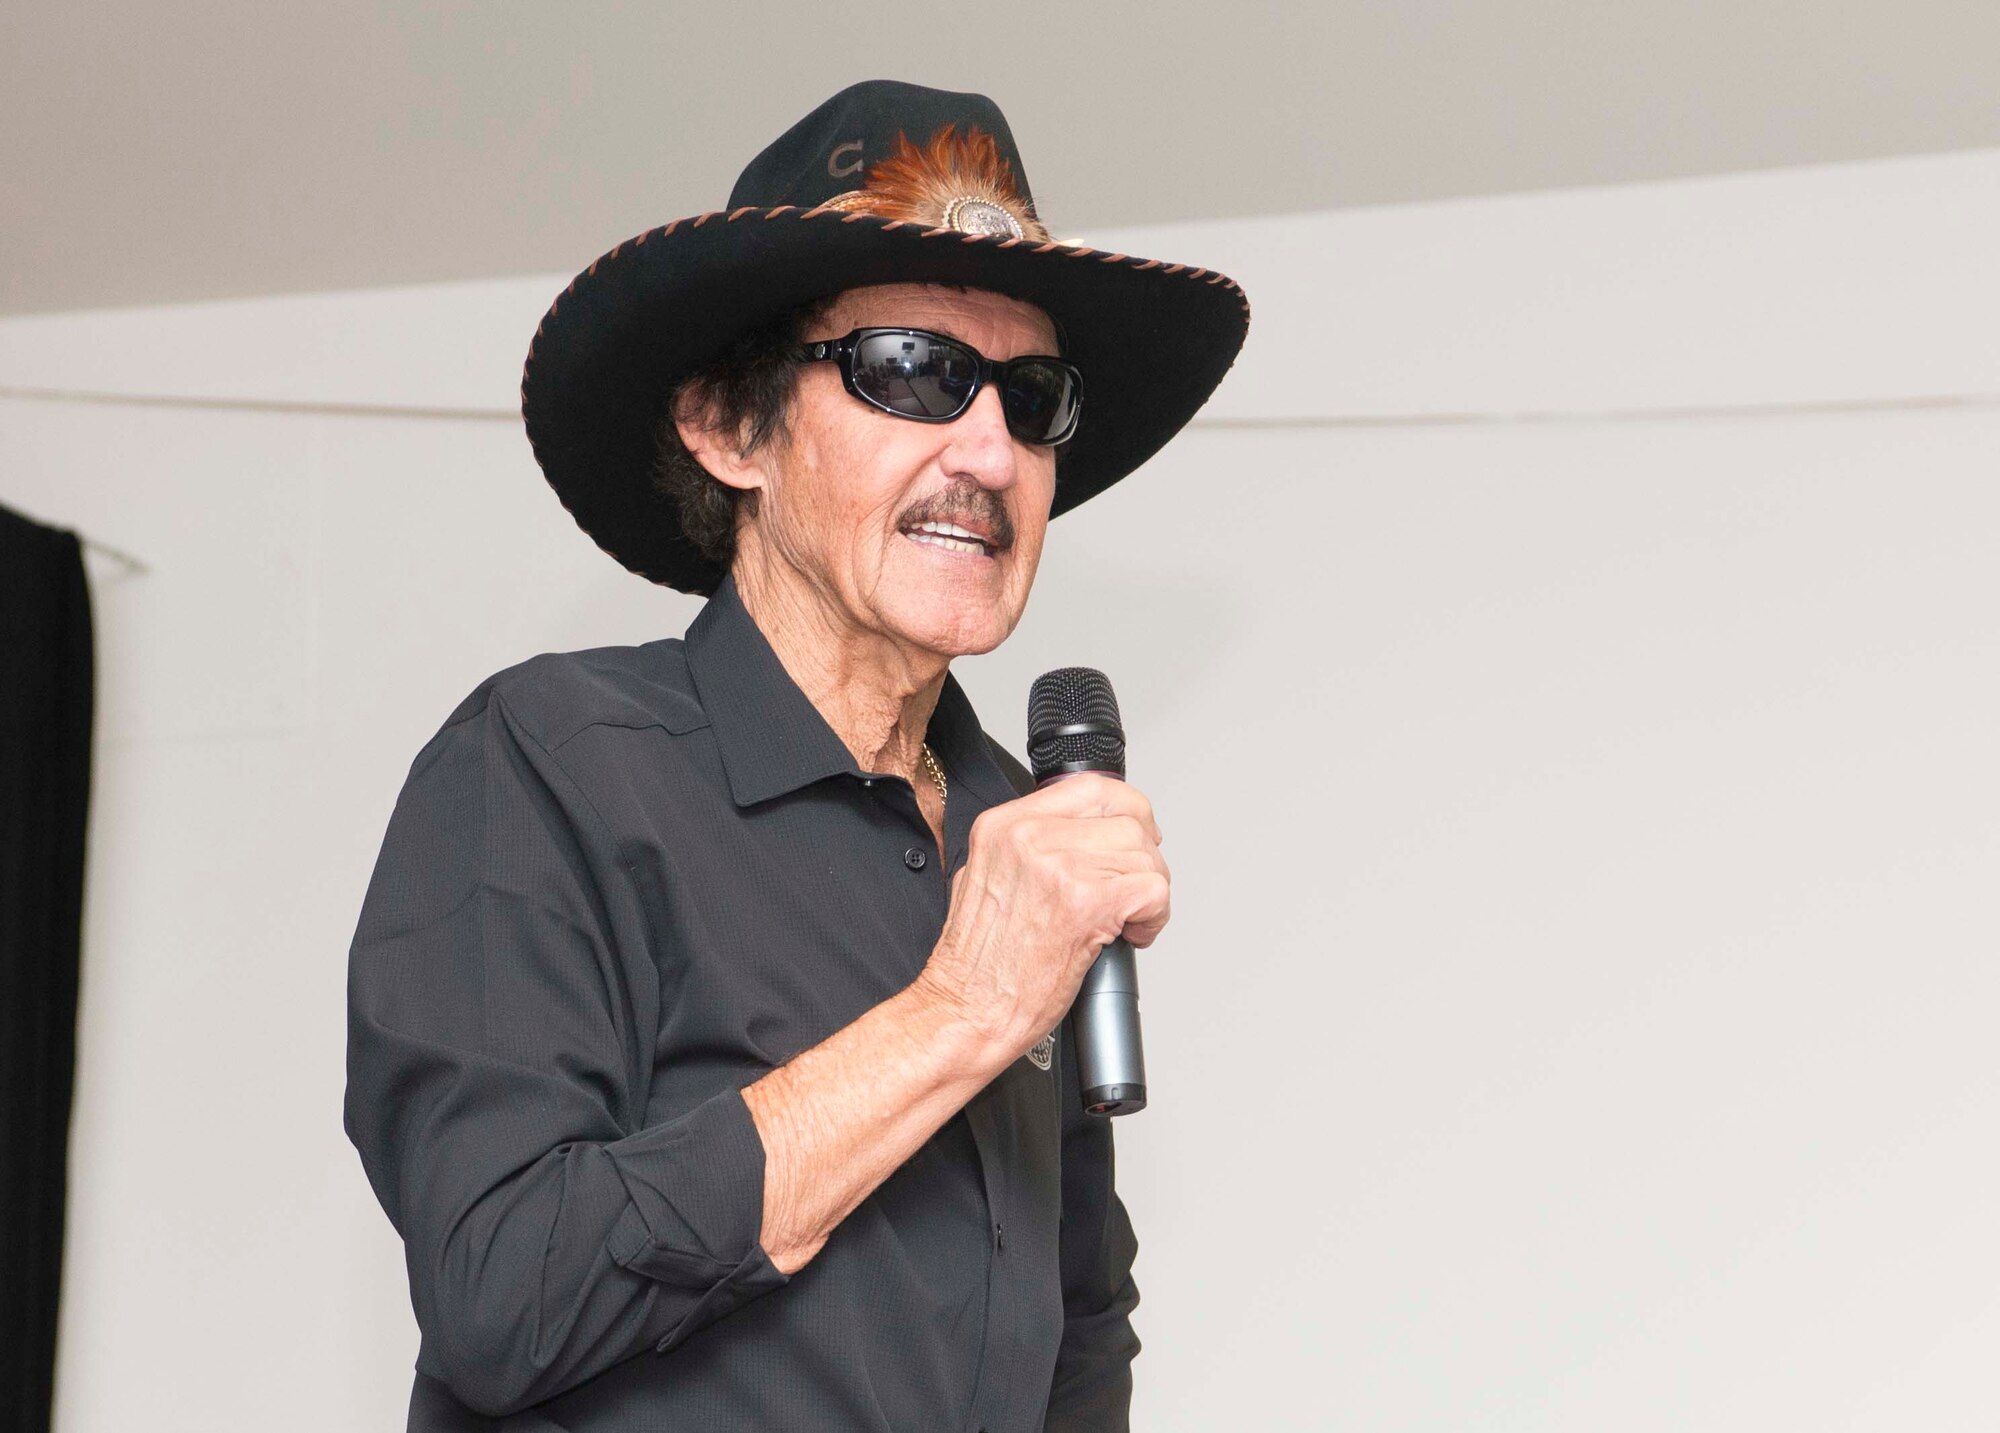 Richard Petty, Nascar legend, speaks to members of Team Ramstein at the Kaiserslautern Military Community Center on Ramstein Air Base, Germany, Jan. 27, 2018. Petty spoke about his career with young men and women in the process of joining the military, met various Team Ramstein leadership, and answered questions at an open event for the Kaiserslautern Military Community. (U.S. Air Force photo by Senior Airman Elizabeth Baker)